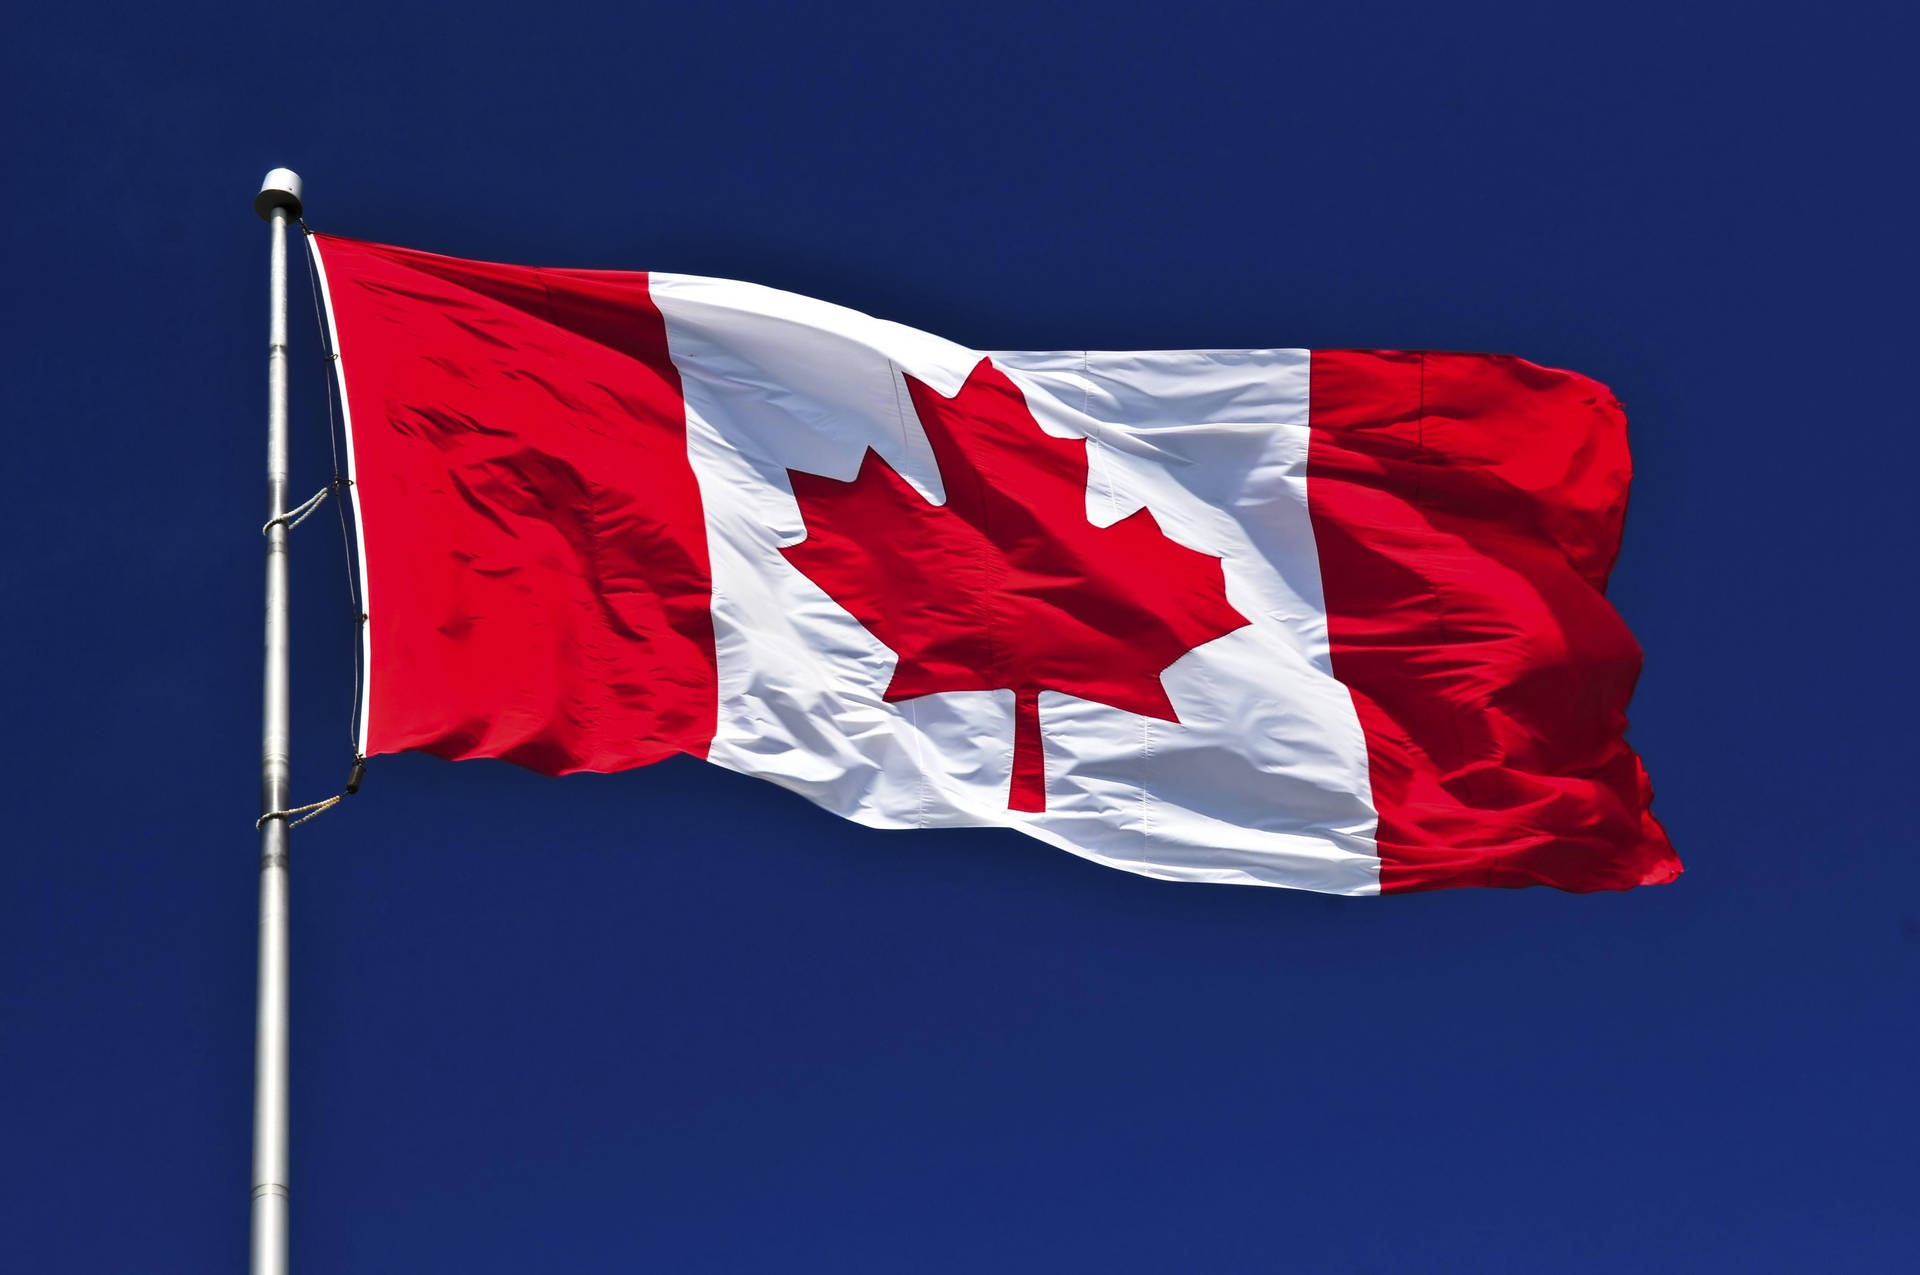 Patriotic Resilience - The Vibrant Flag Of Canada